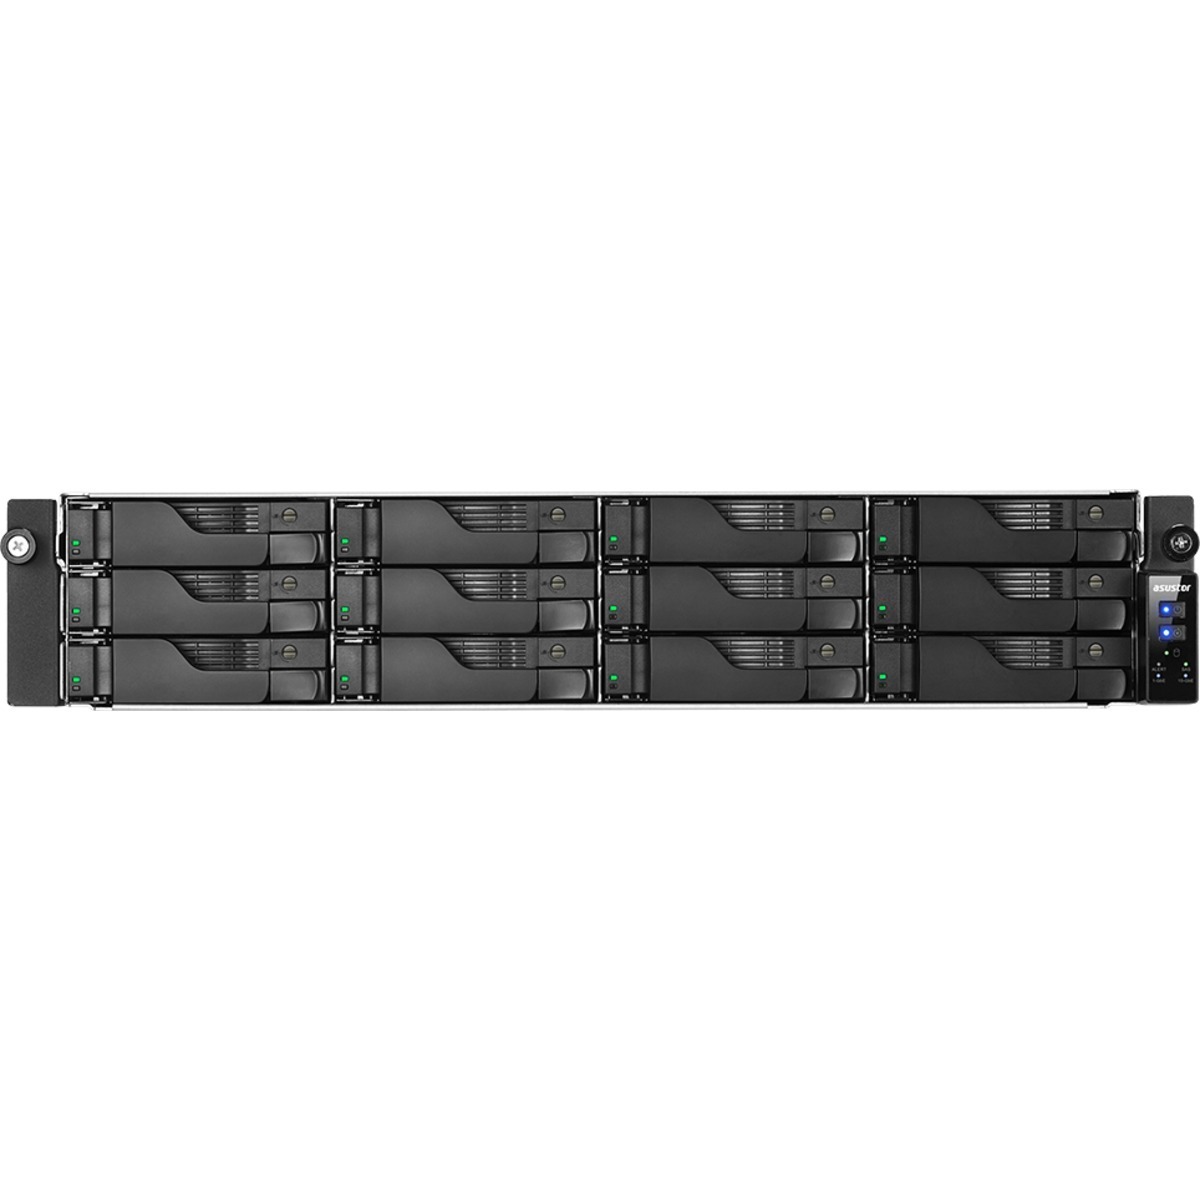 buy ASUSTOR AS7112RDX Lockerstor 12R Pro 48tb RackMount NAS - Network Attached Storage Device 12x4000gb Seagate BarraCuda ST4000DM004 3.5 7200rpm SATA 6Gb/s HDD CONSUMER Class Drives Installed - Burn-In Tested - nas headquarters buy network attached storage server device das new raid-5 free shipping simply usa AS7112RDX Lockerstor 12R Pro